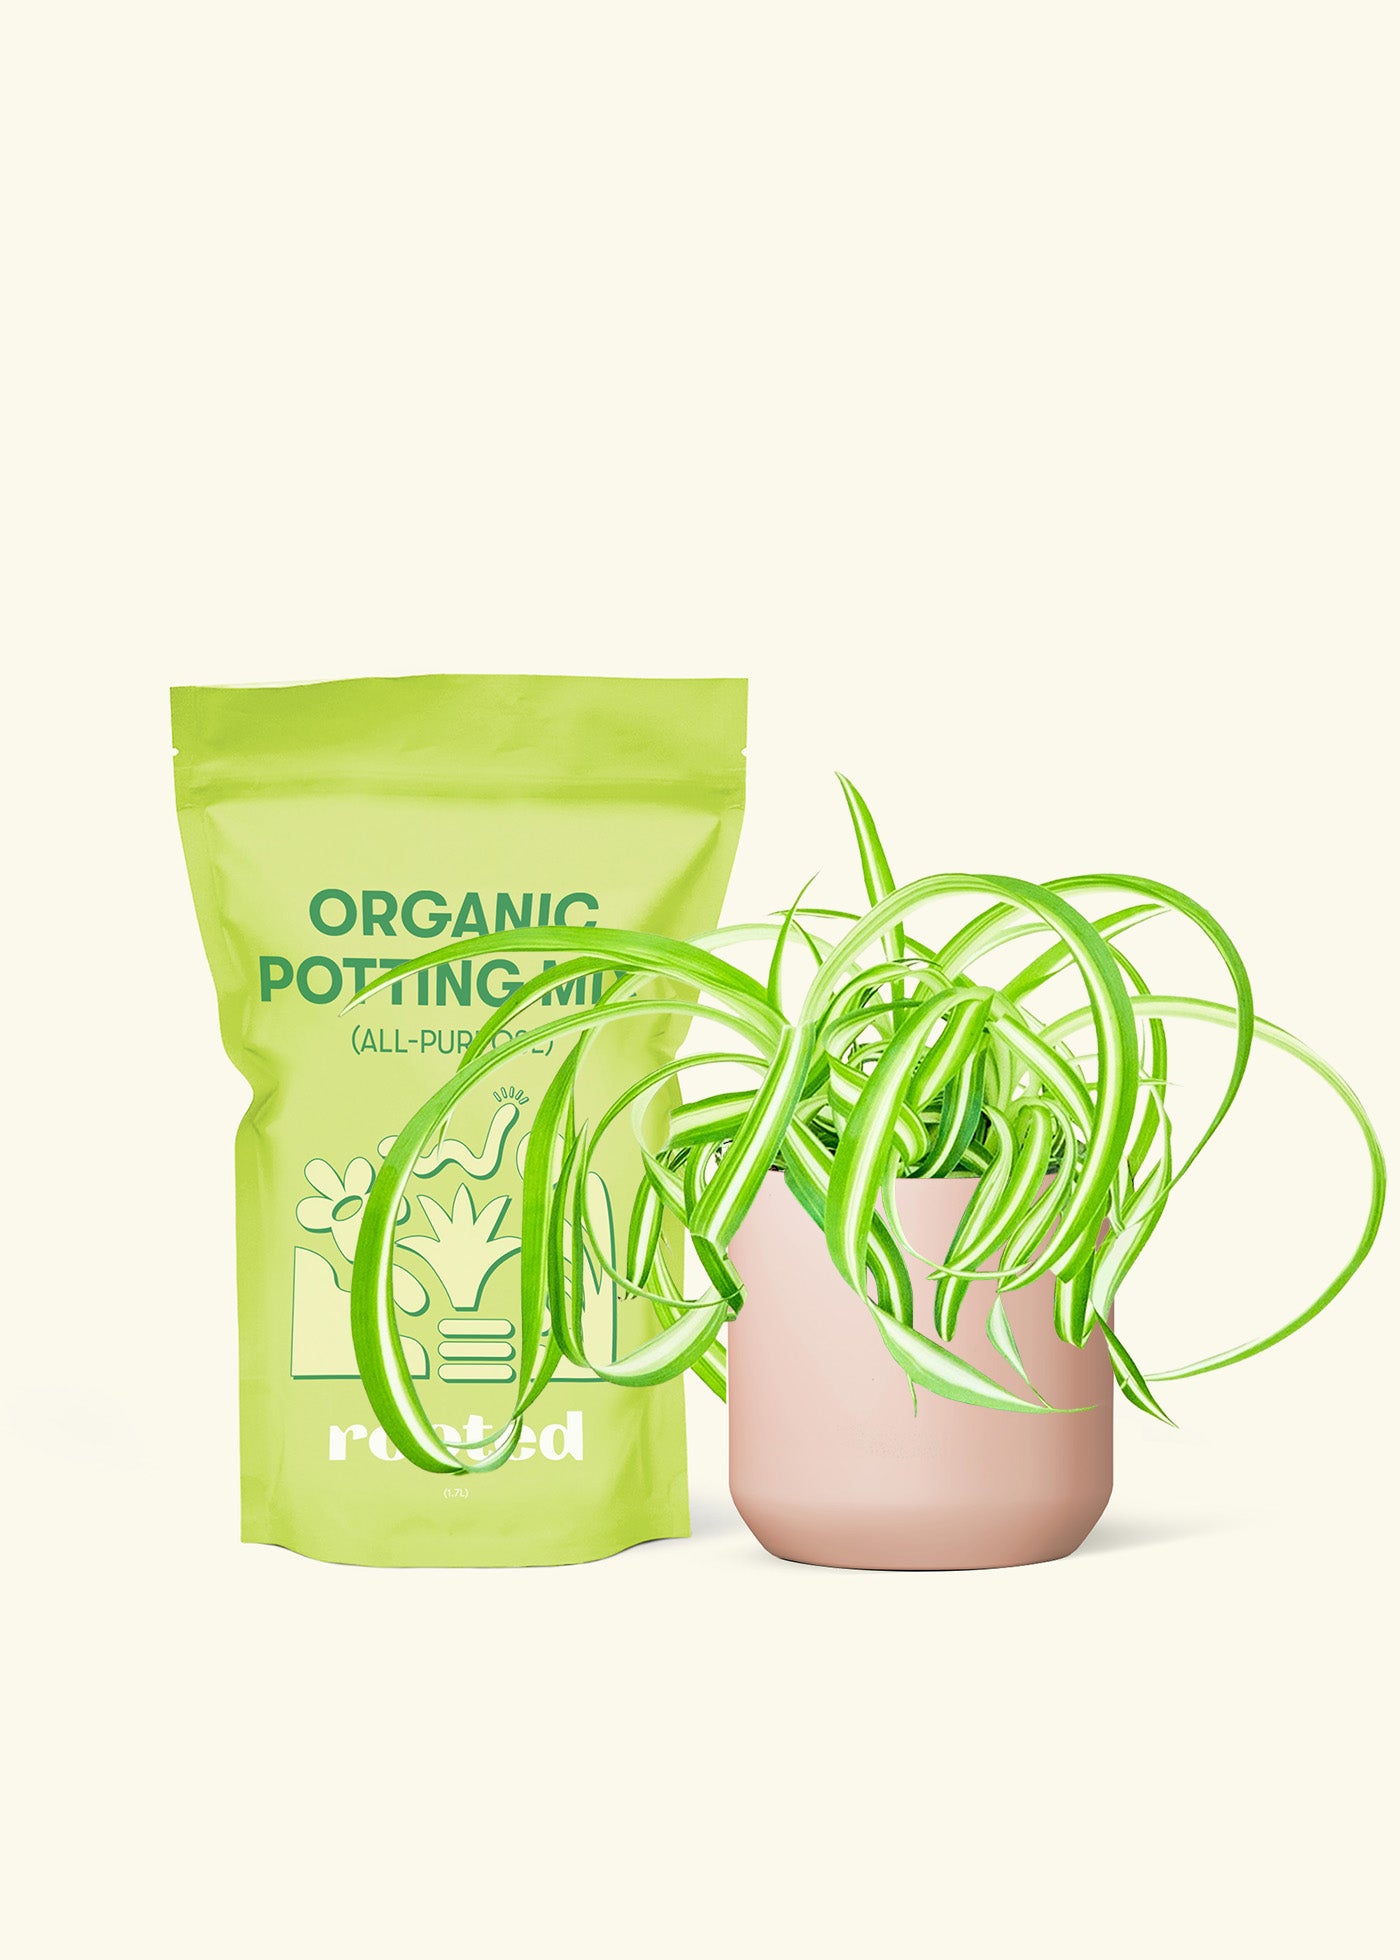 Small Spider Plant 'Bonnie' in a pink cylinder pot and a bag of soil.